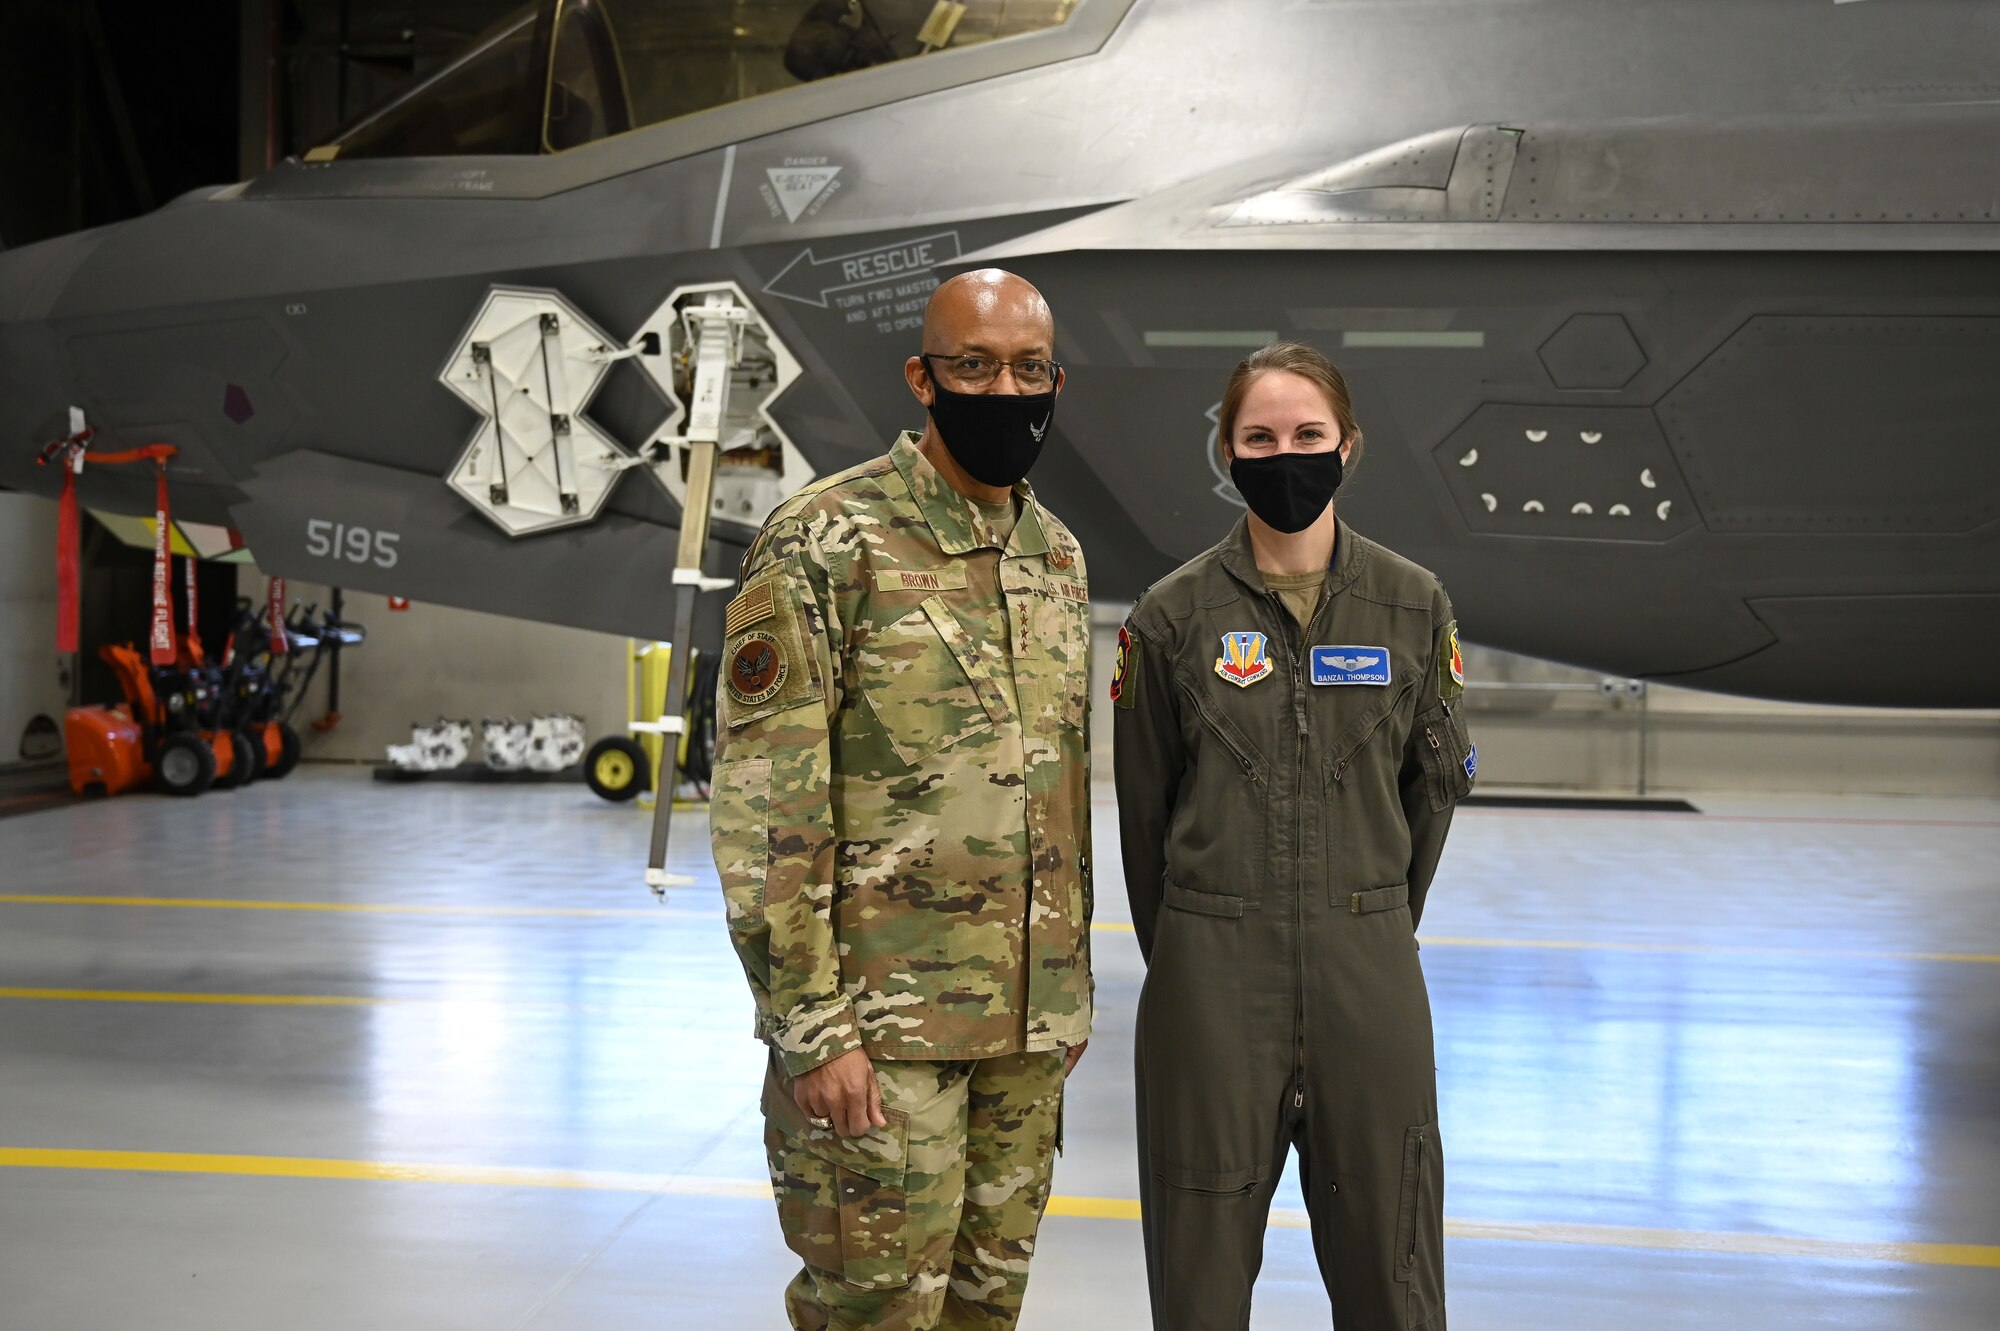 A photo of Air Force Chief of Staff Gen. Charles Q. Brown, Jr.'s visit to Hill Air Force Base, Utah.